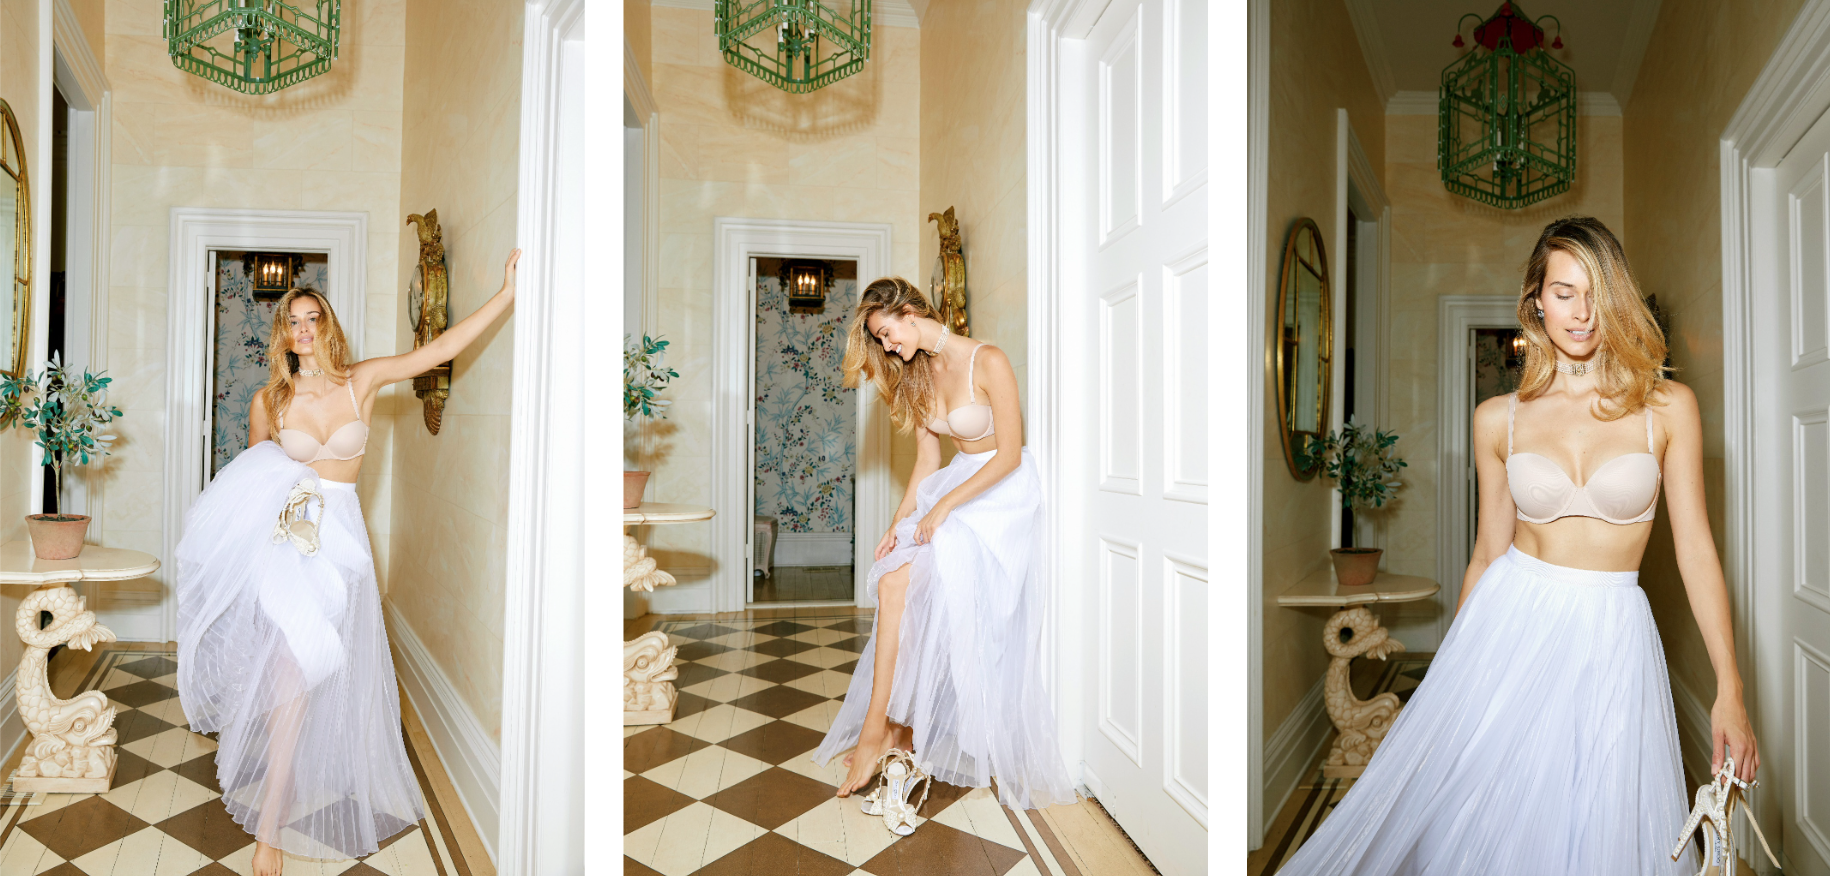 Spanx Just Launched Its First-Ever Bridal Collection